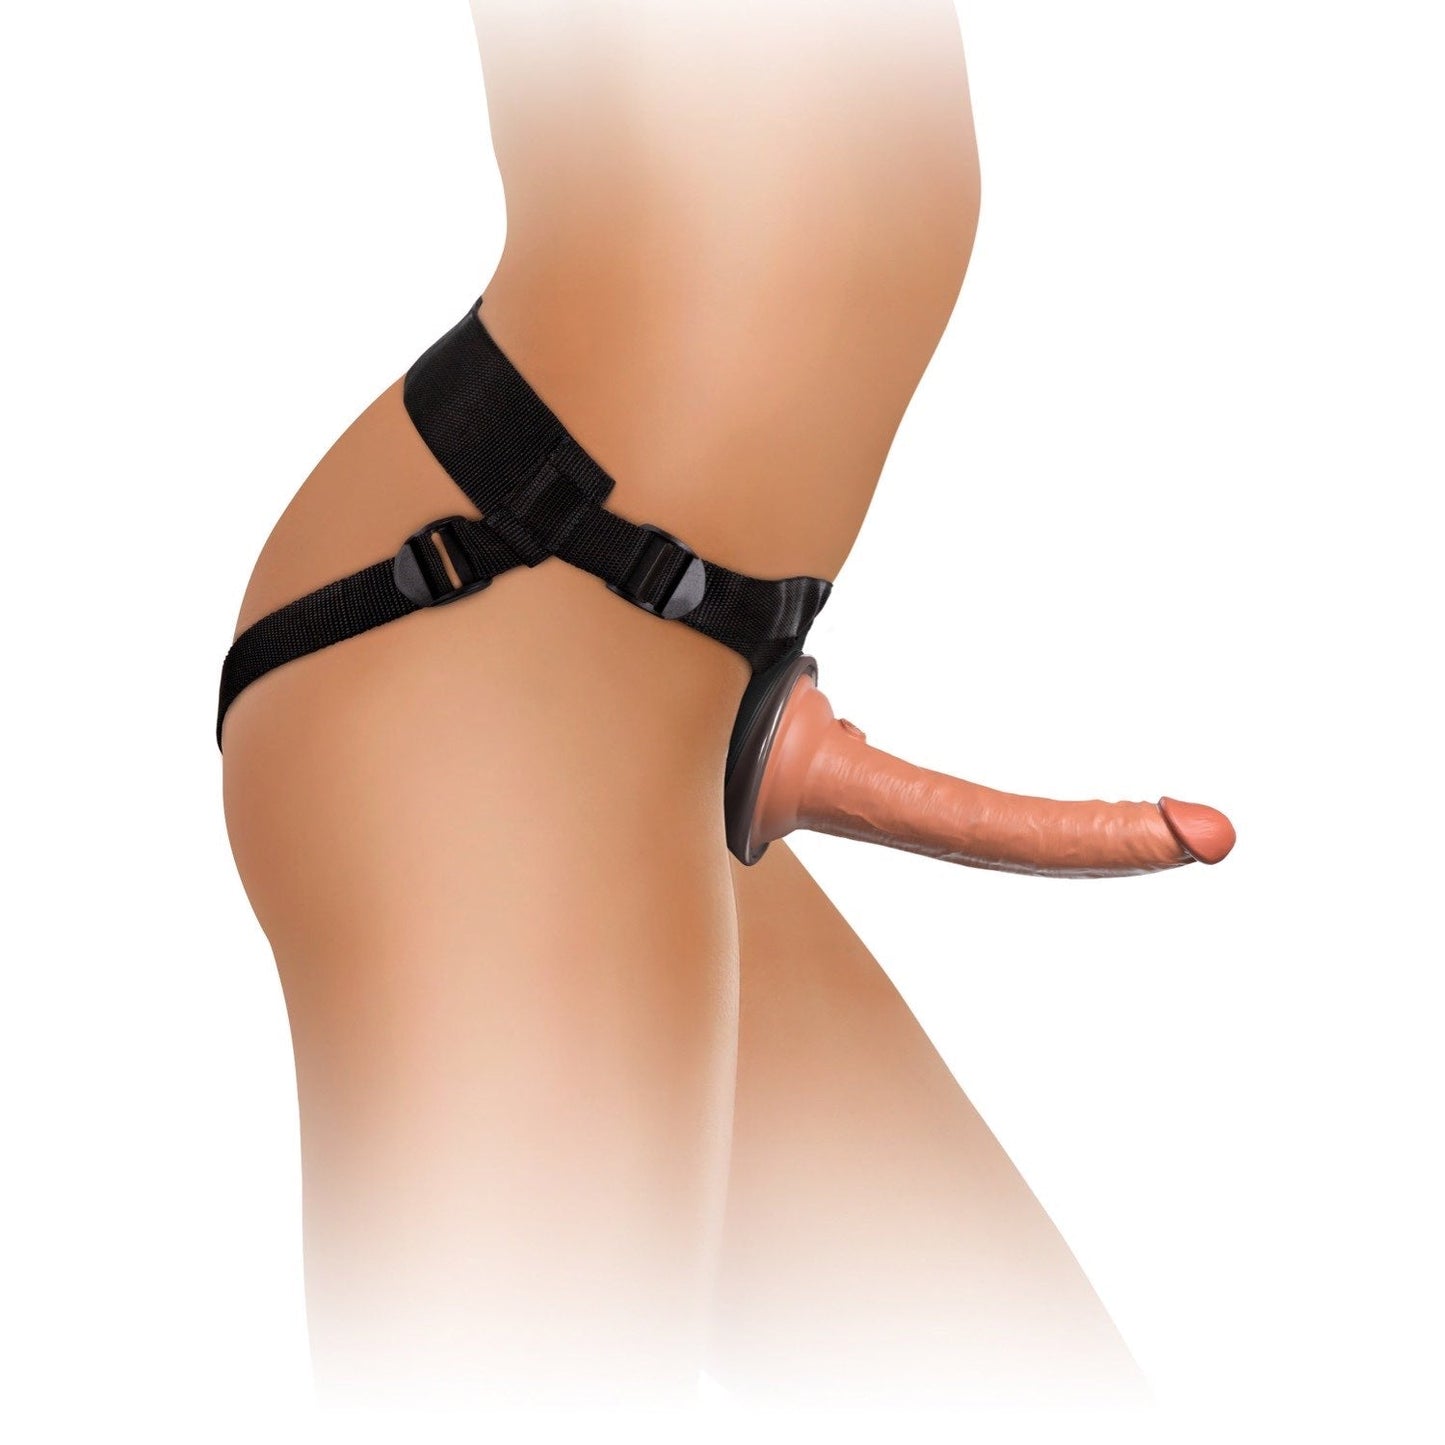 Elite Comfy Silicone Body Dock Kit - Body Dock Strap-On Harness with Tan 17.8 cm Dong